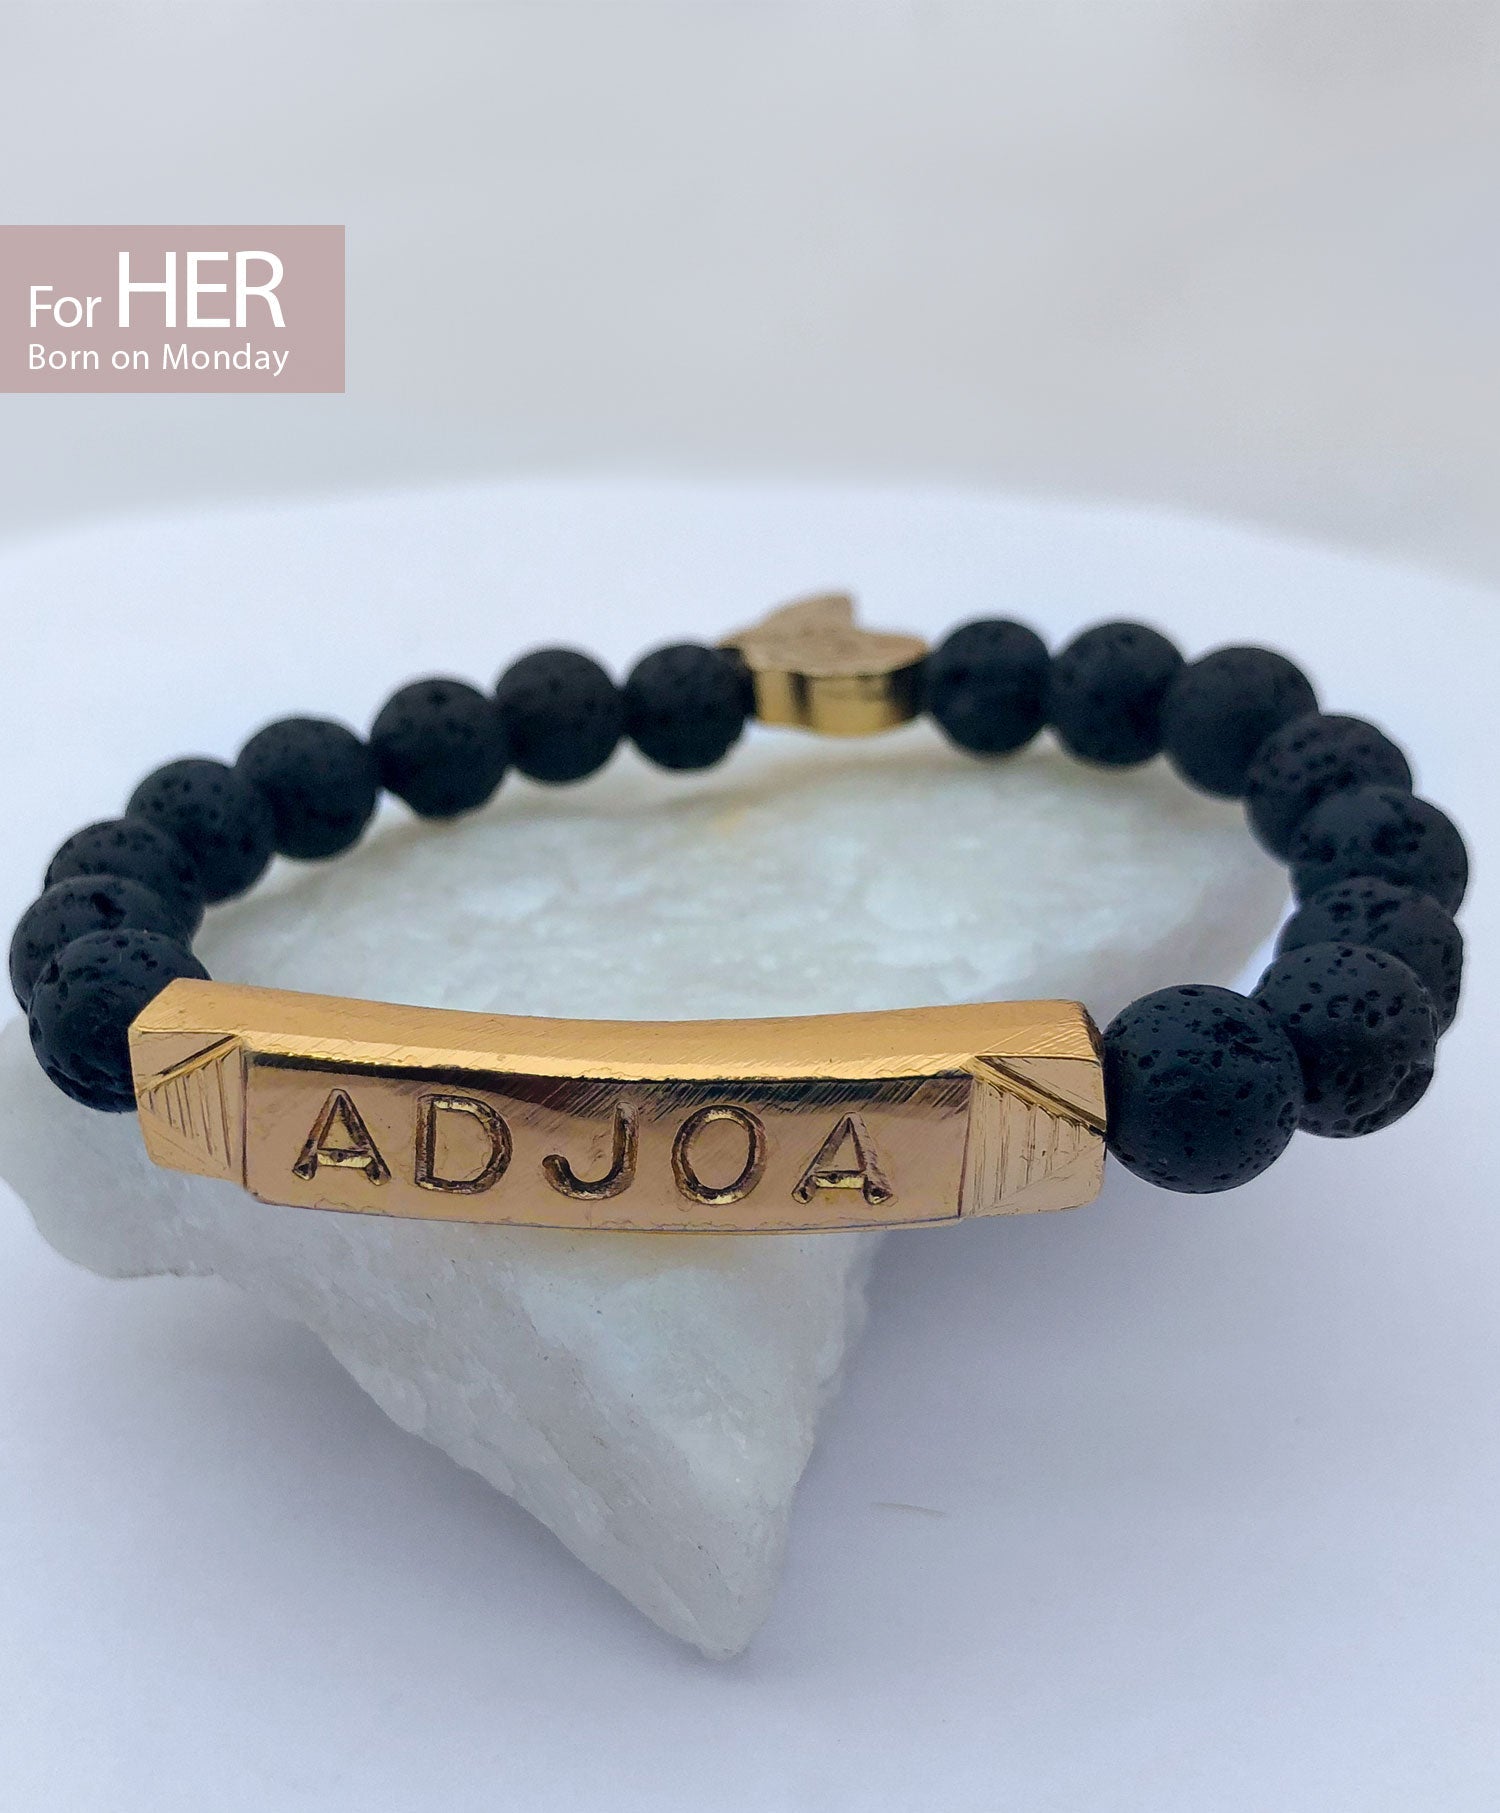 Adjoa Identity Beads | For (HER) Born on Monday